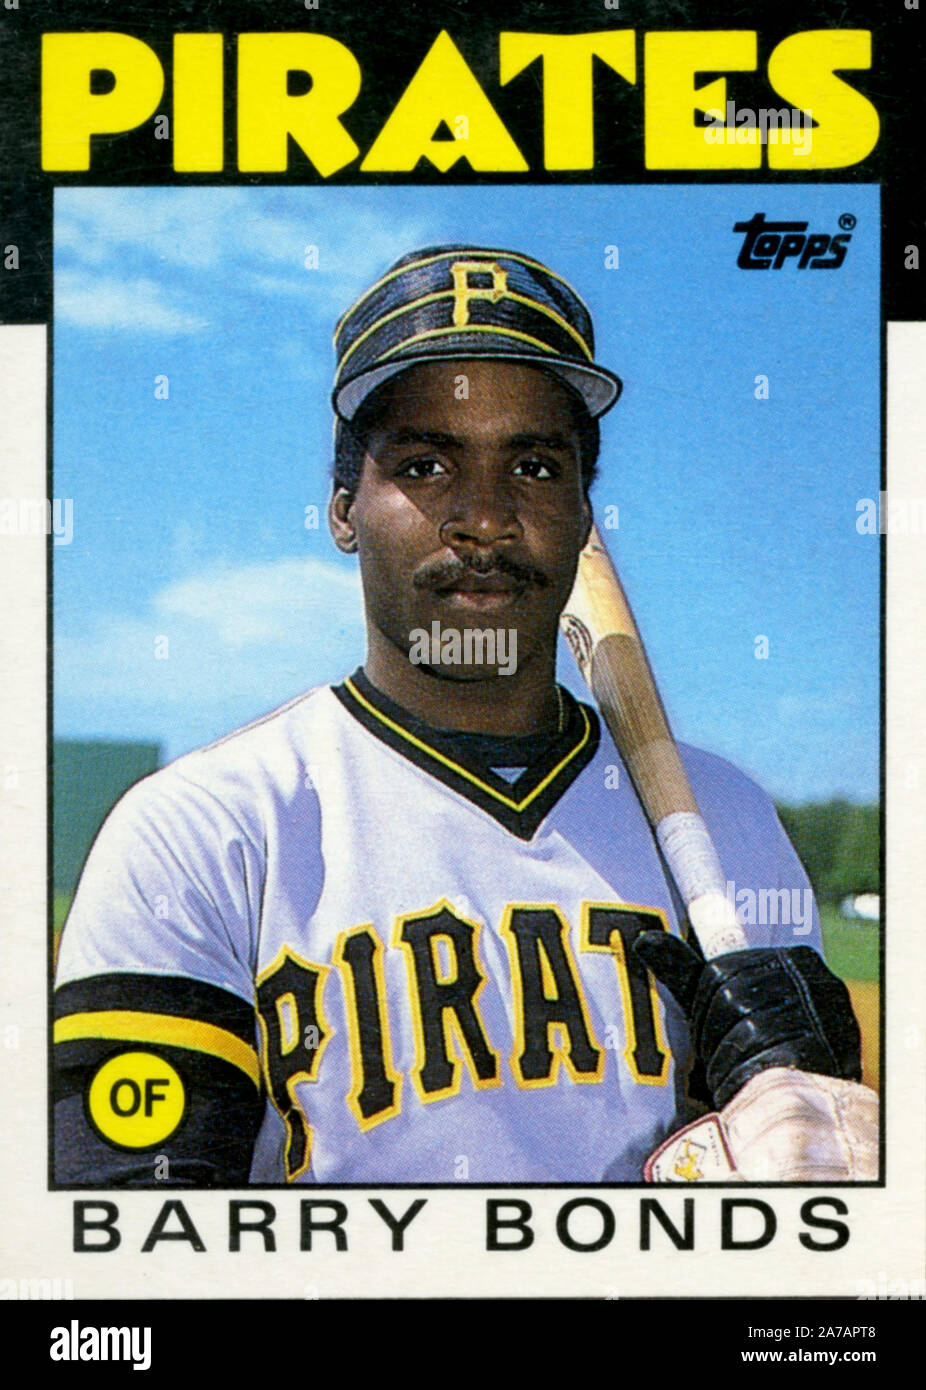 Barry Bonds 1986 Topps baseball rookie card with the Pittsburgh Pirates. Stock Photo